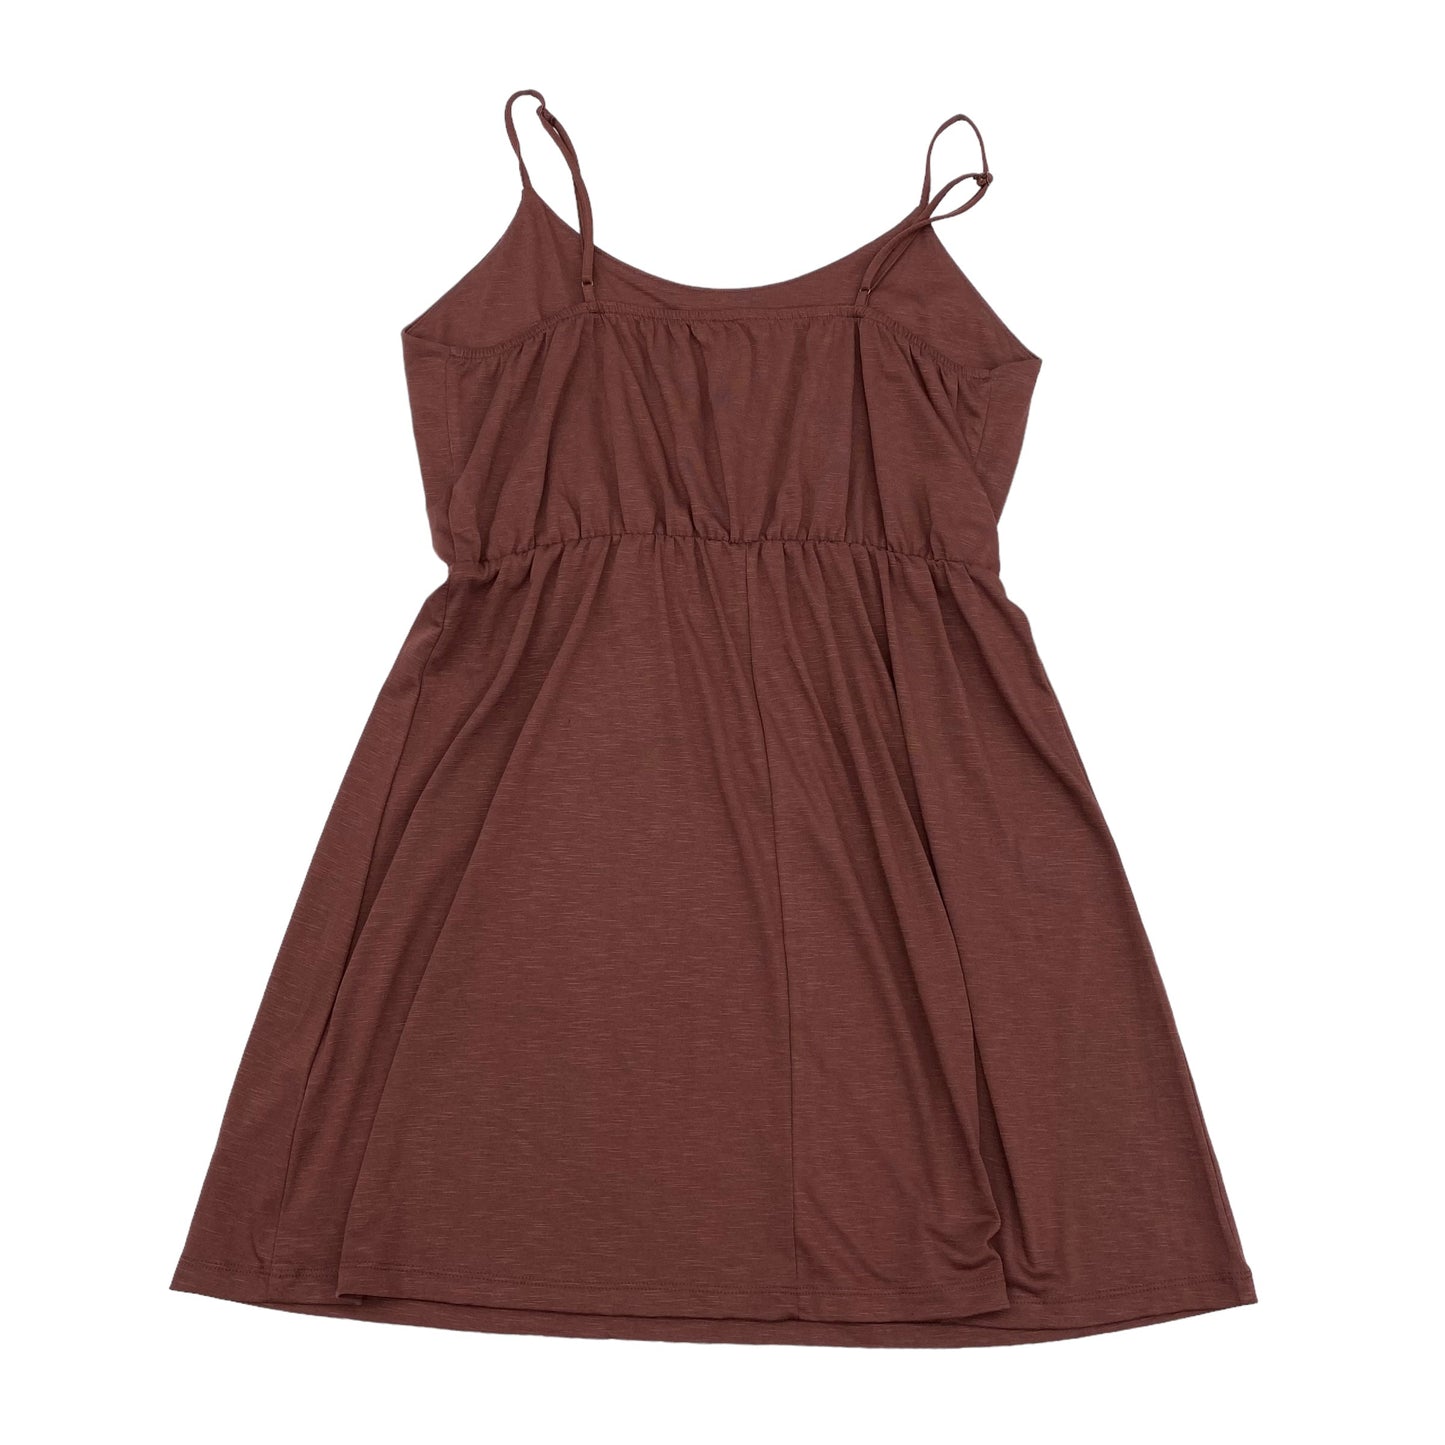 BROWN OLD NAVY DRESS CASUAL SHORT, Size L